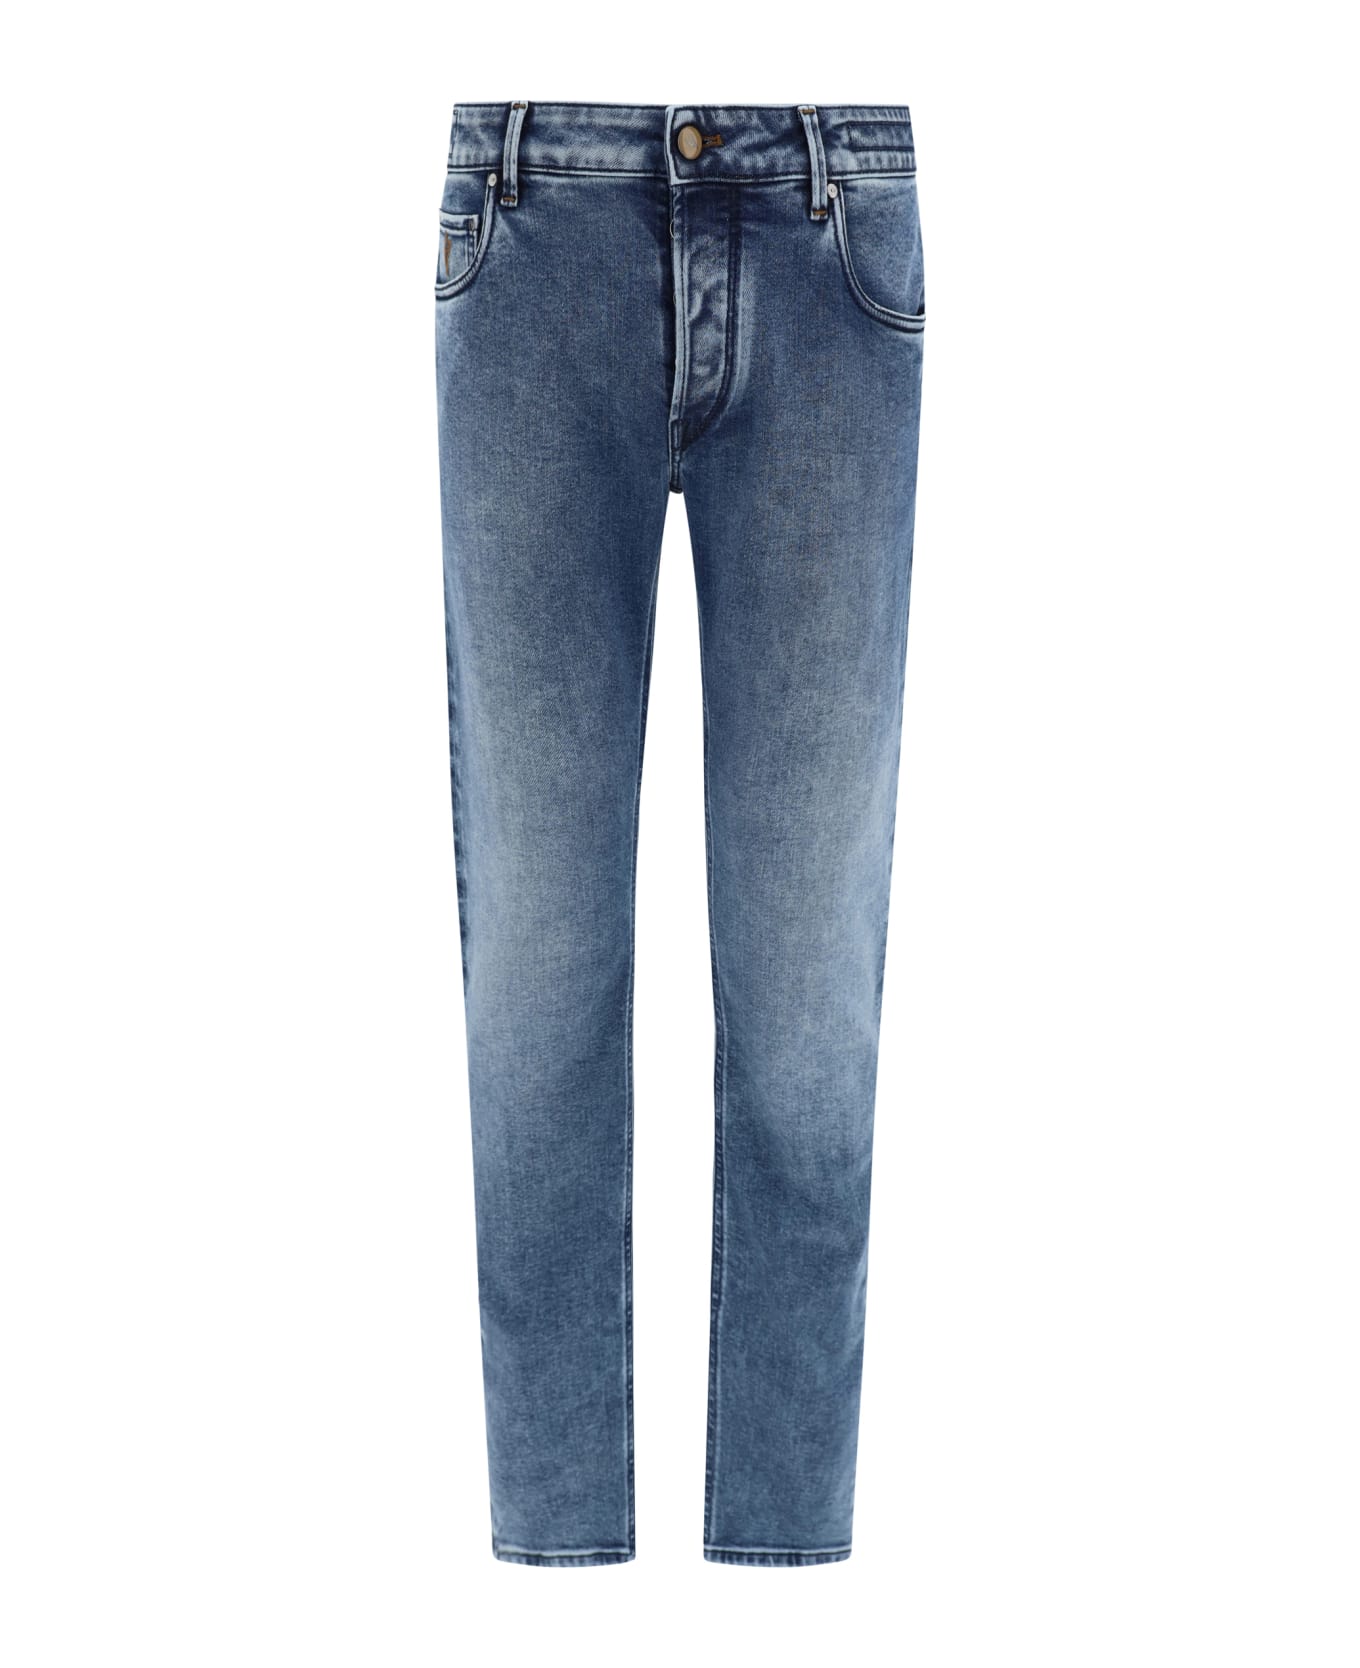 Hand Picked Jeans - Lav.3